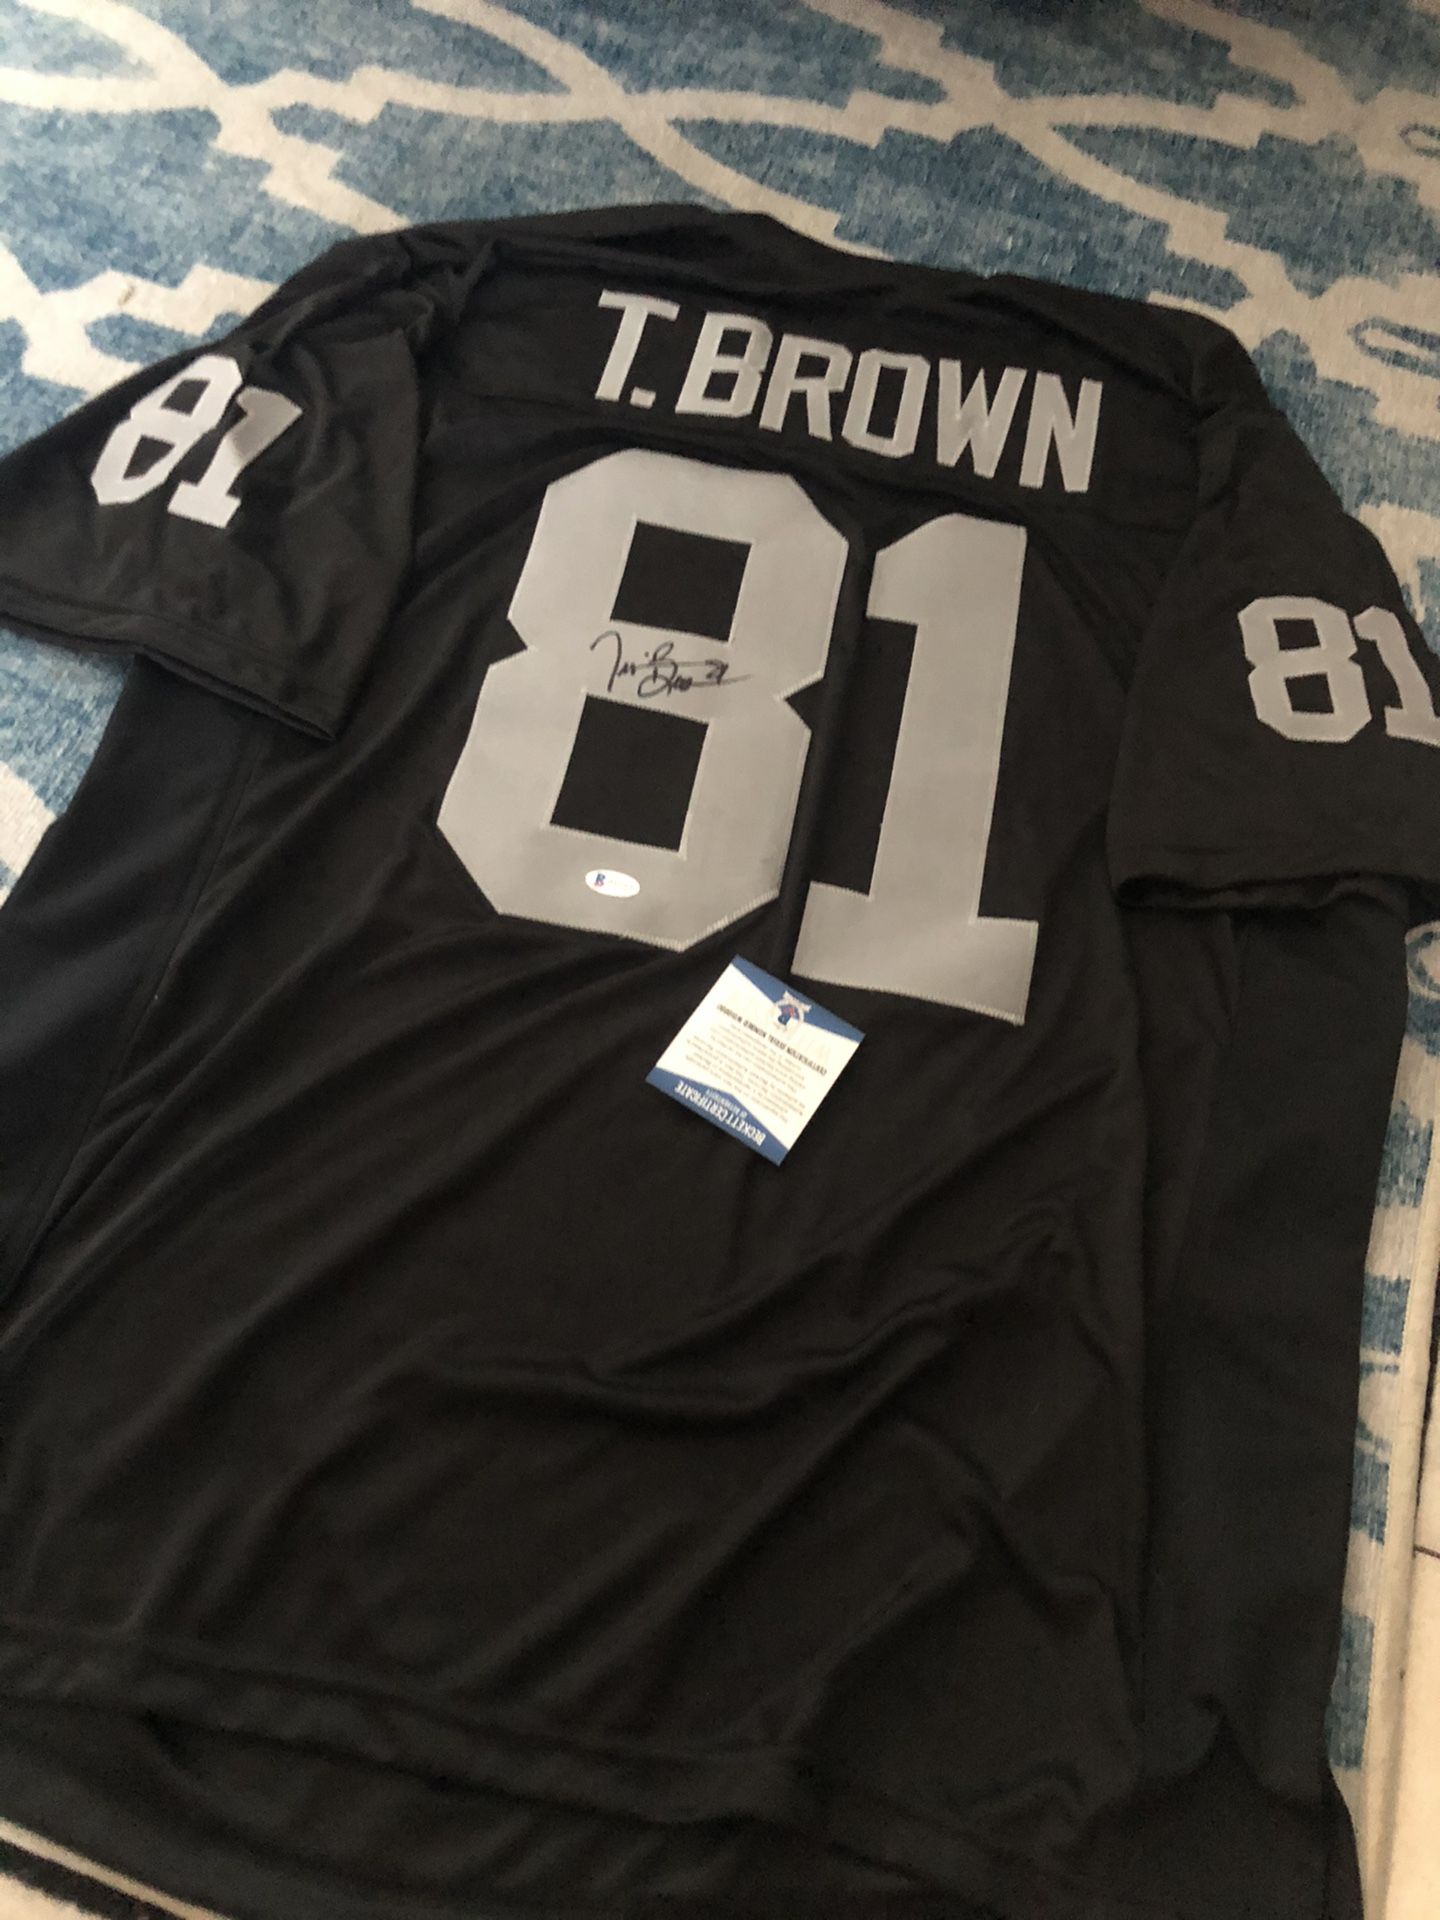 Raiders Signed Jersey Tim Brown 